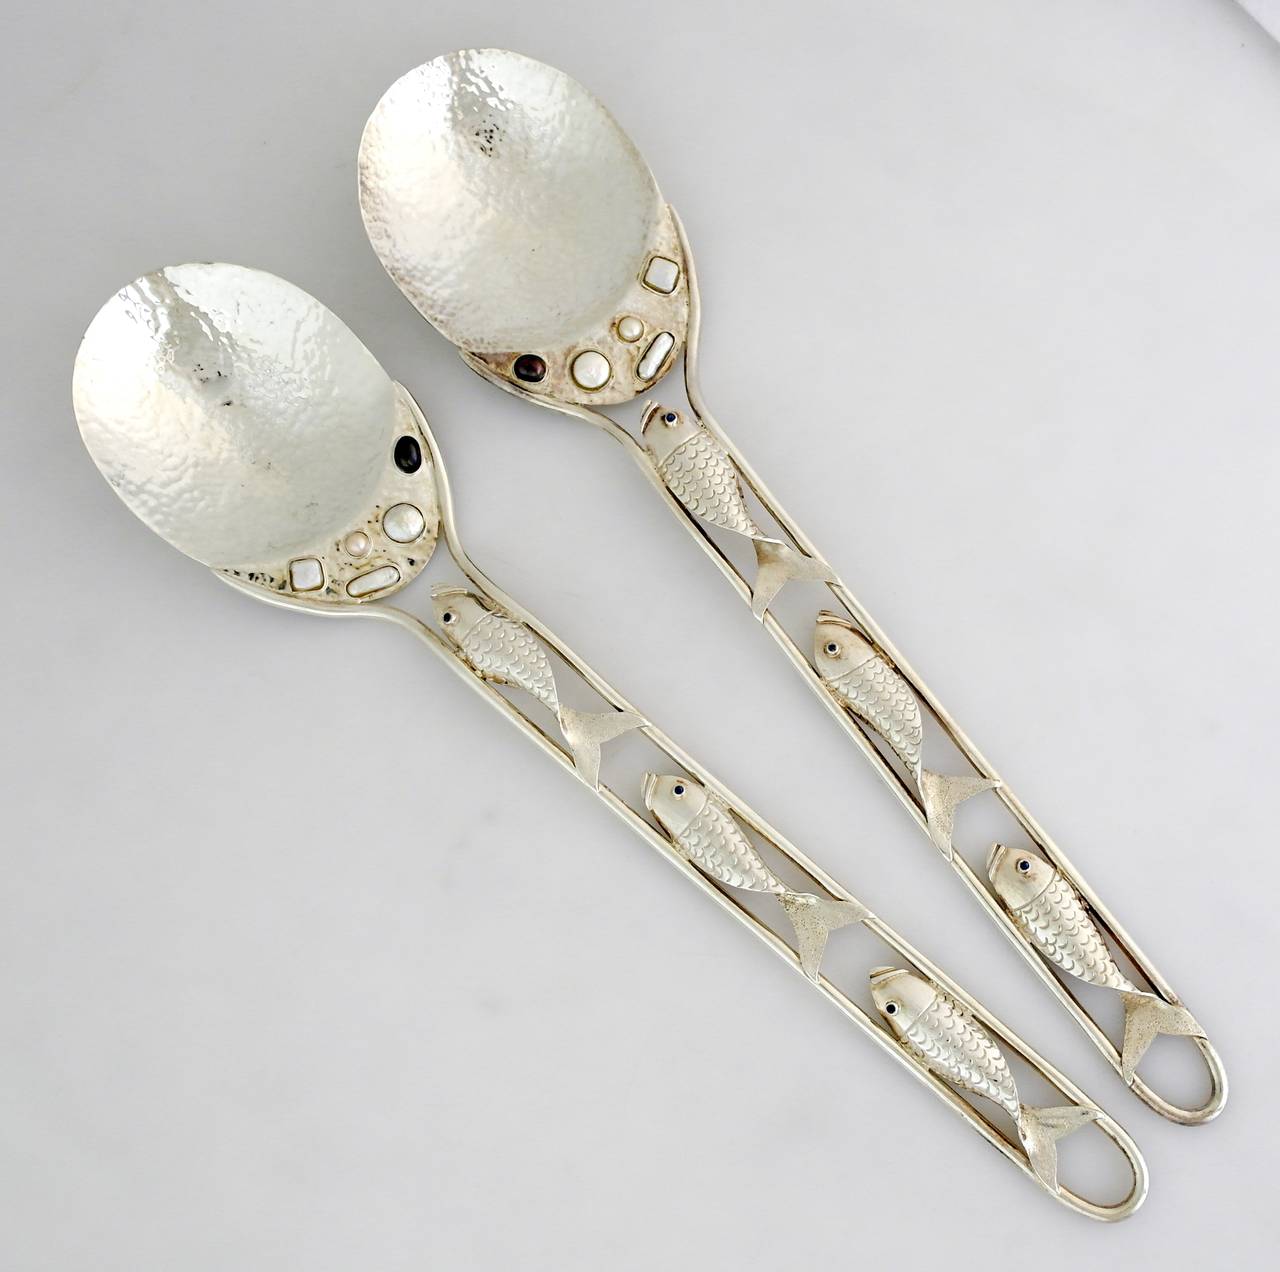 Being offered are a pair of circa silver plate serving spoons by Emilia Castillo of Taxco, Mexico. Large hand-wrought servers; pierced handles with fish motifs; applied white and black pearls on the hammered bowls. Dimensions: 16 3/4